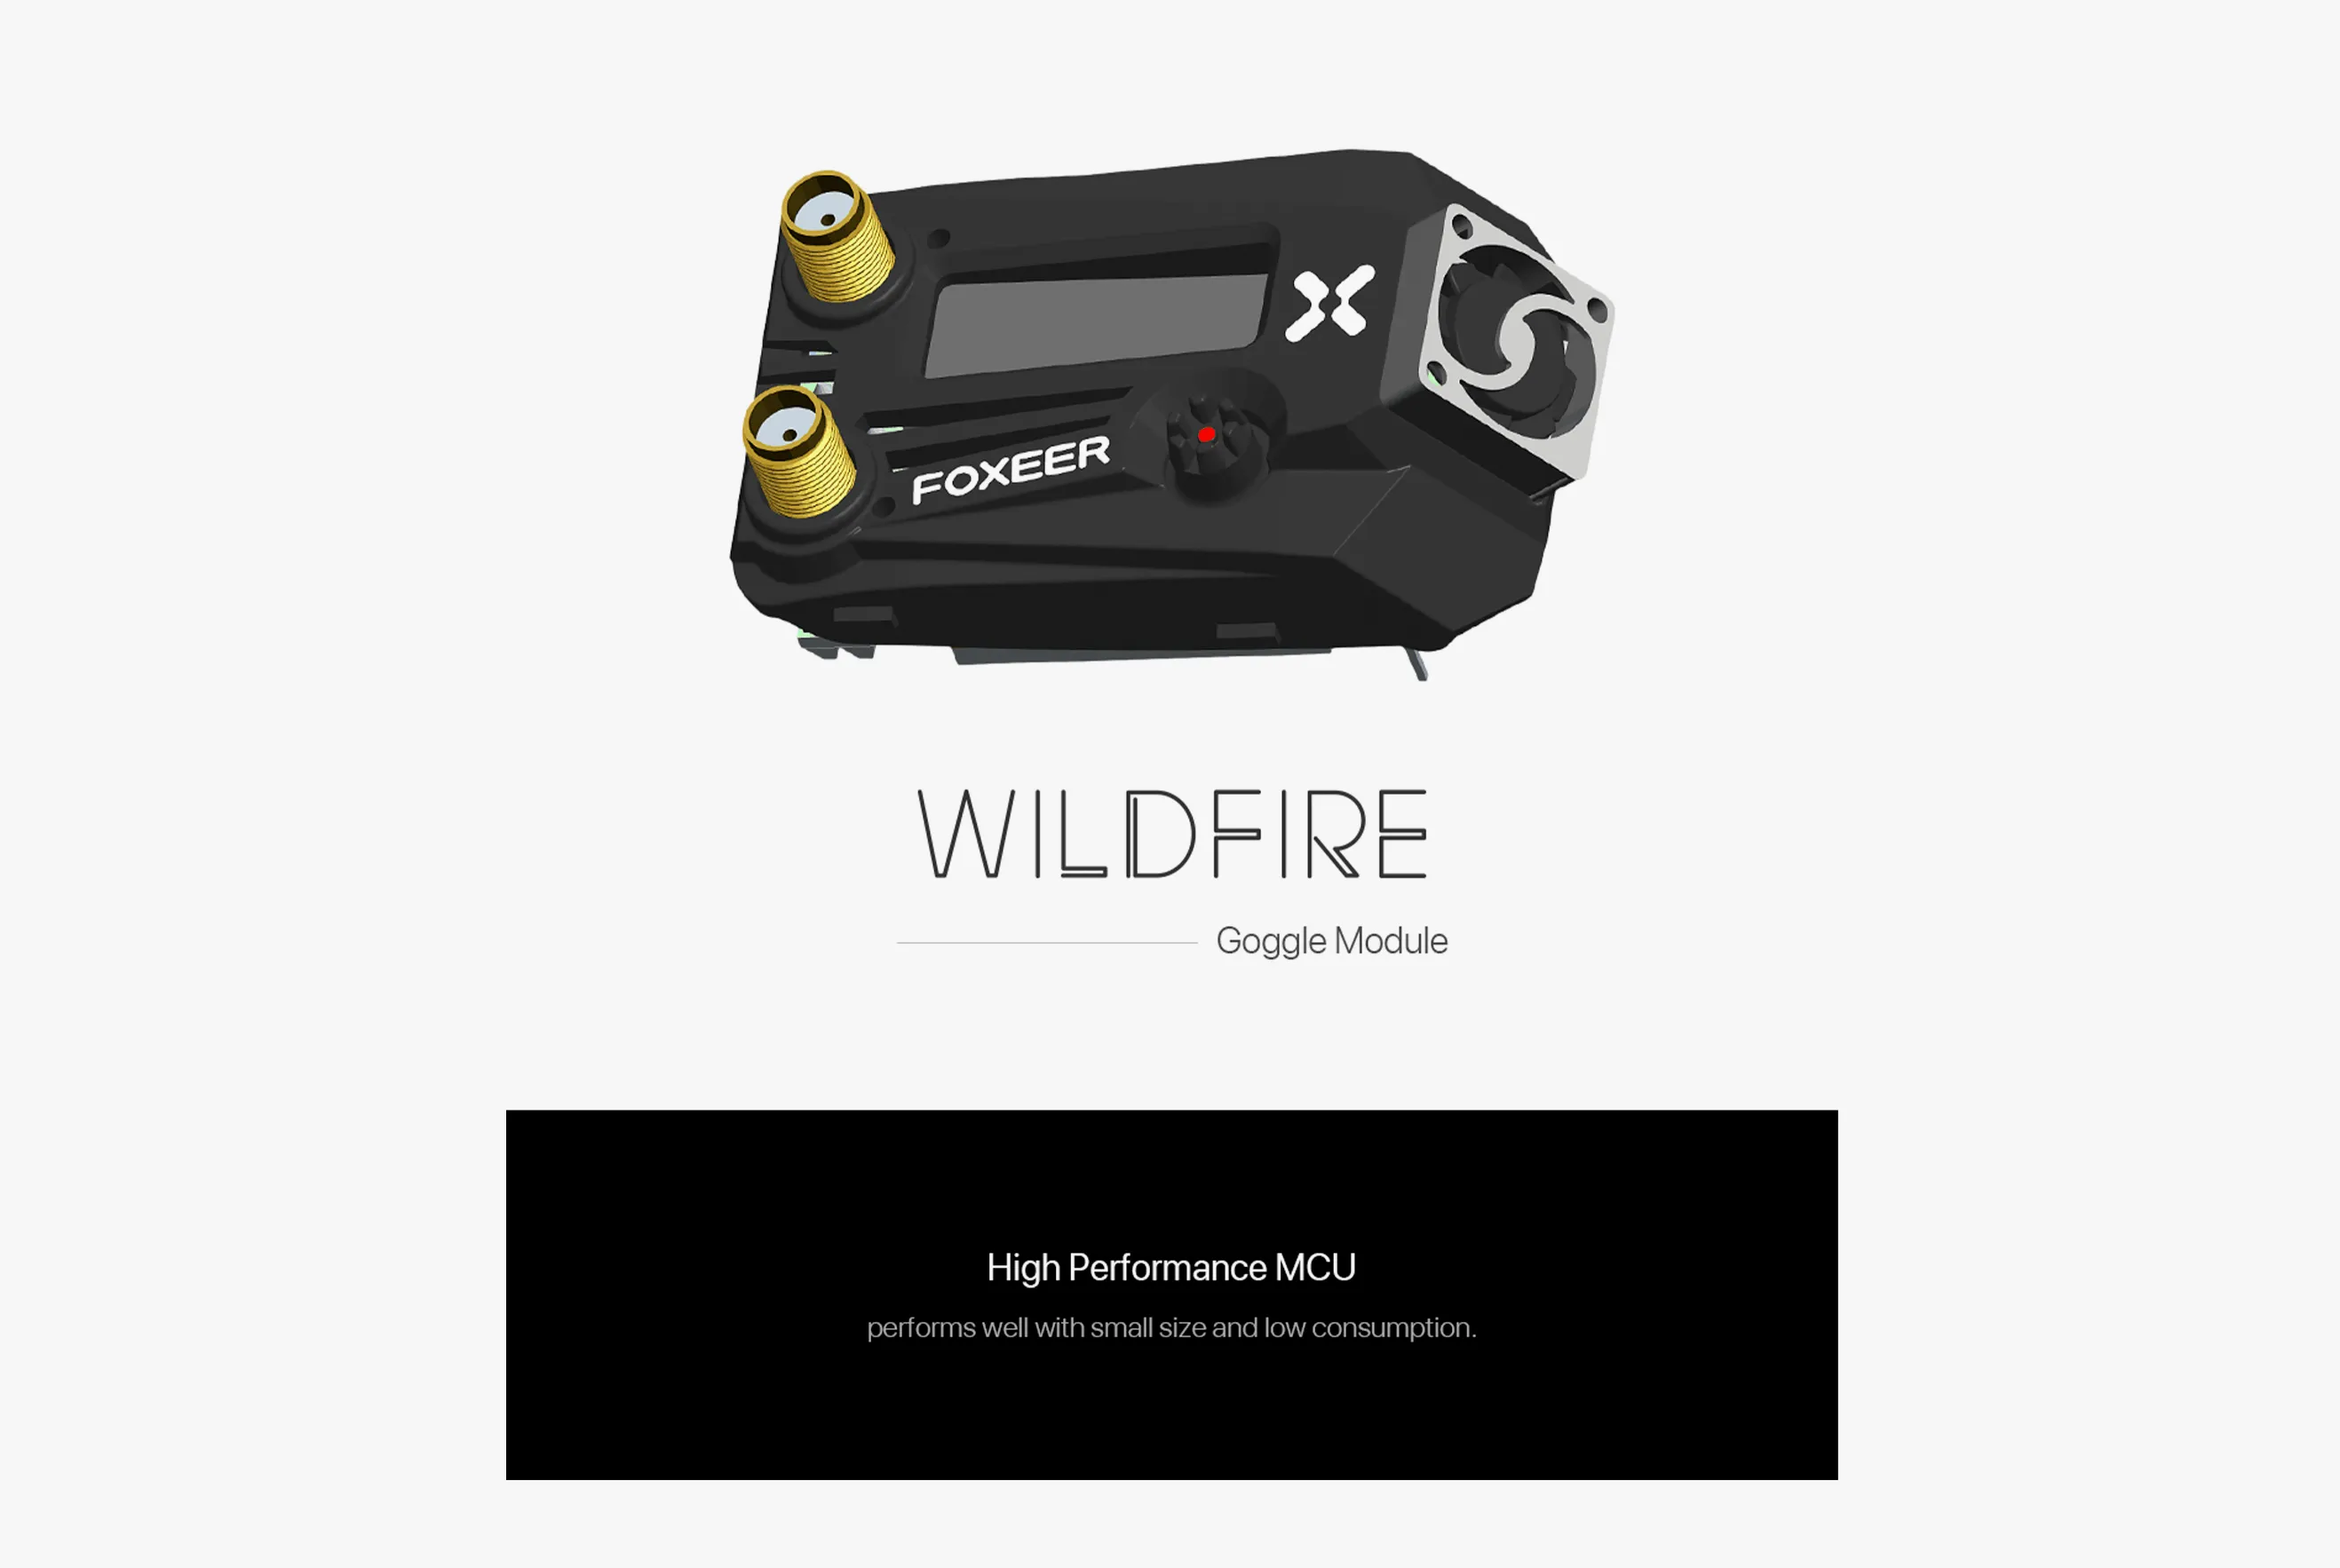 Foxeer wildfire 5.8ghz 72ch dual receiver for fpv